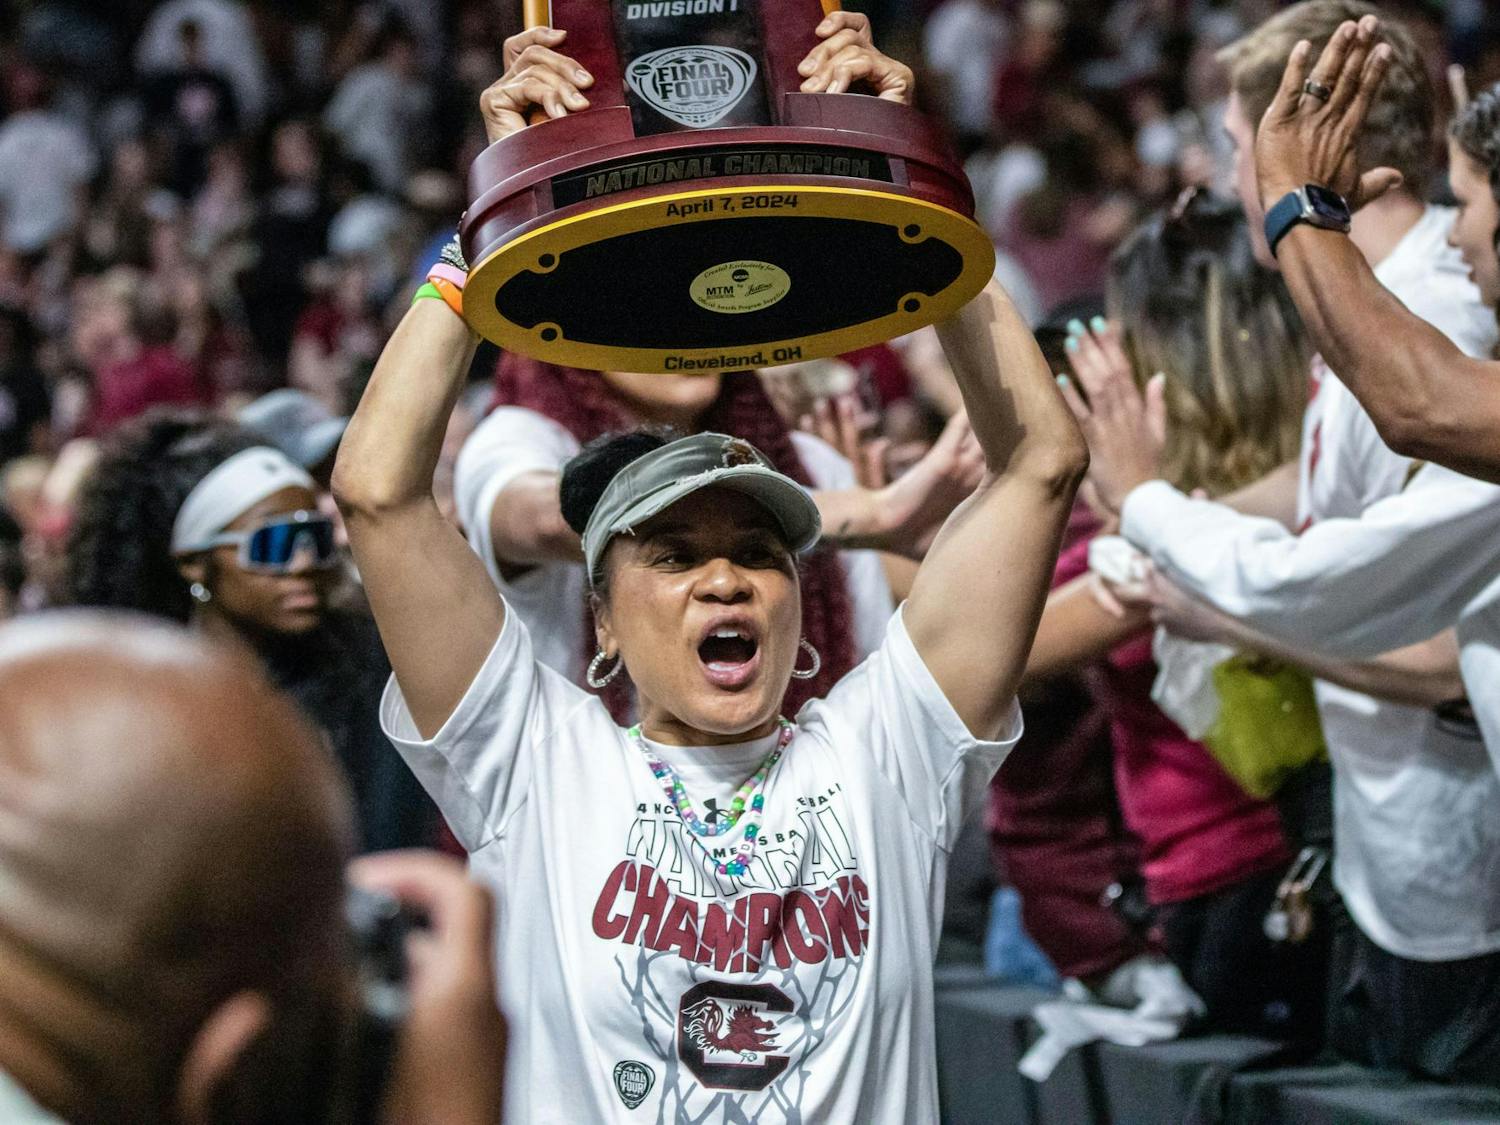 Head coach Dawn Staley hoists the NCAA Women's National Championship trophy over her head as she and her team greet fans following a welcome home celebration for the South Carolina Women's Basketball team at Colonial Life Arena on April 8, 2024. Staley has led the Gamecocks to three National Championship titles since 2017.